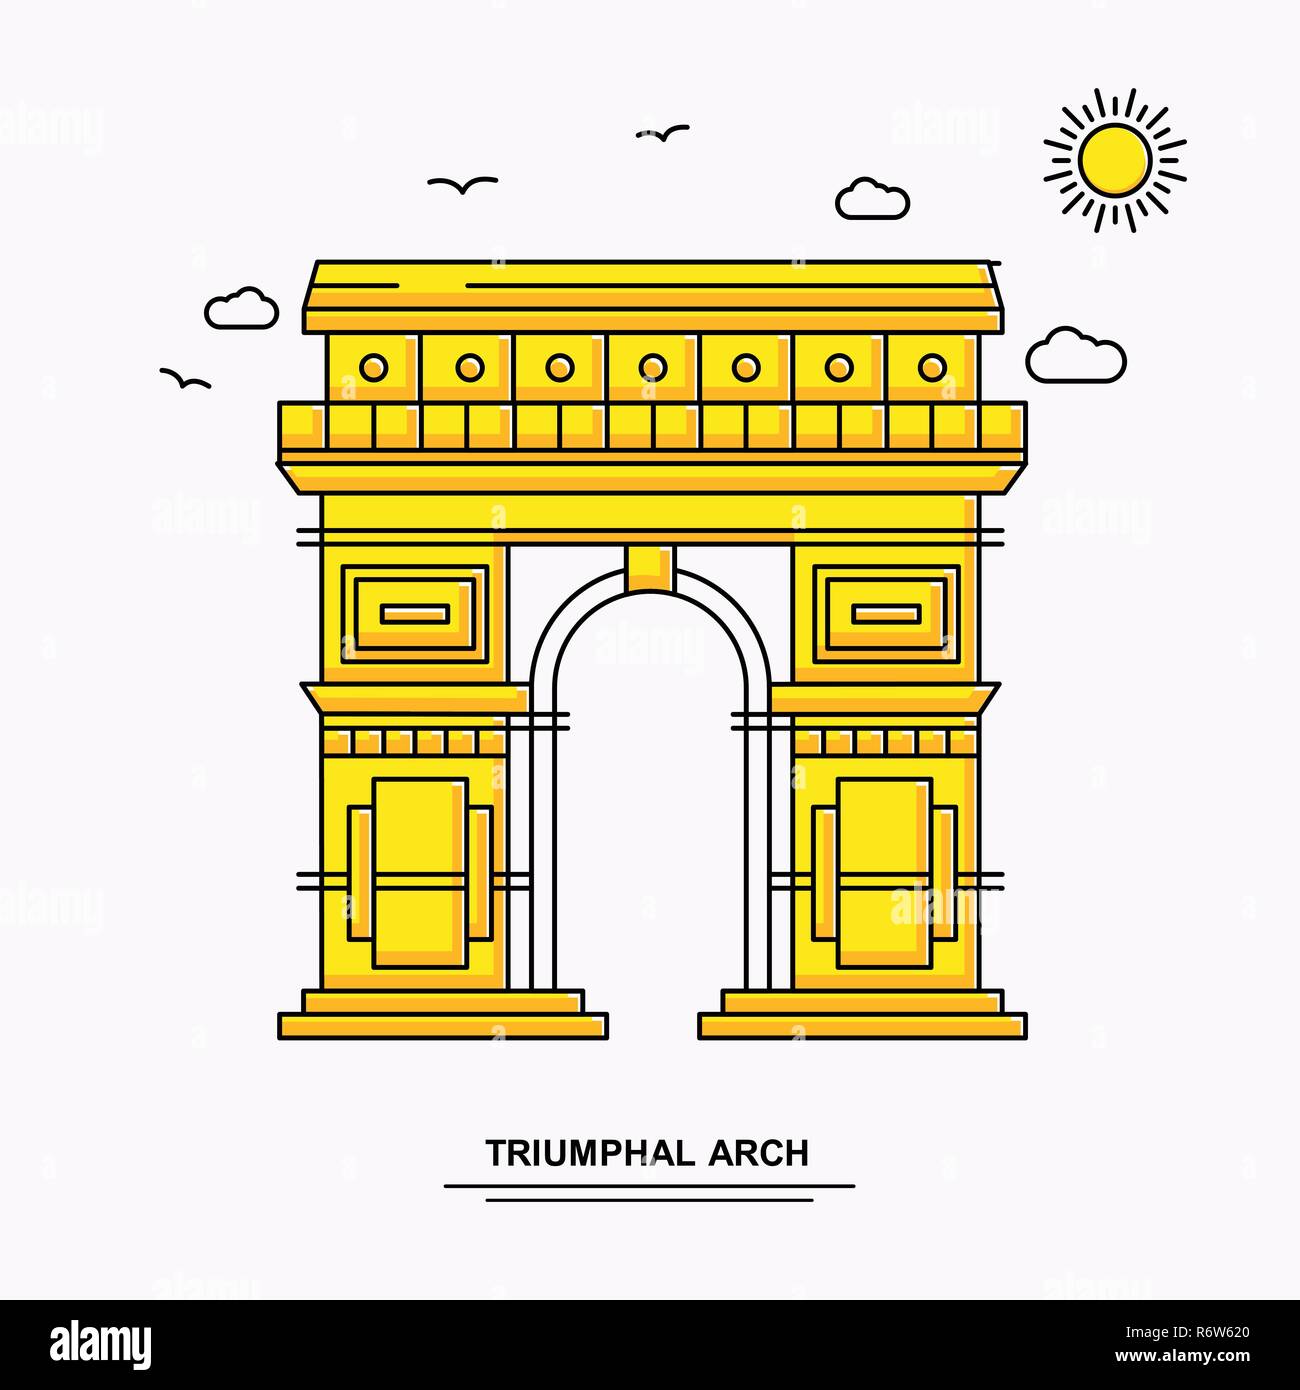 TRIUMPHAL ARCH Monument Poster Template. World Travel Yellow illustration Background in Line Style with beauture nature Scene Stock Vector